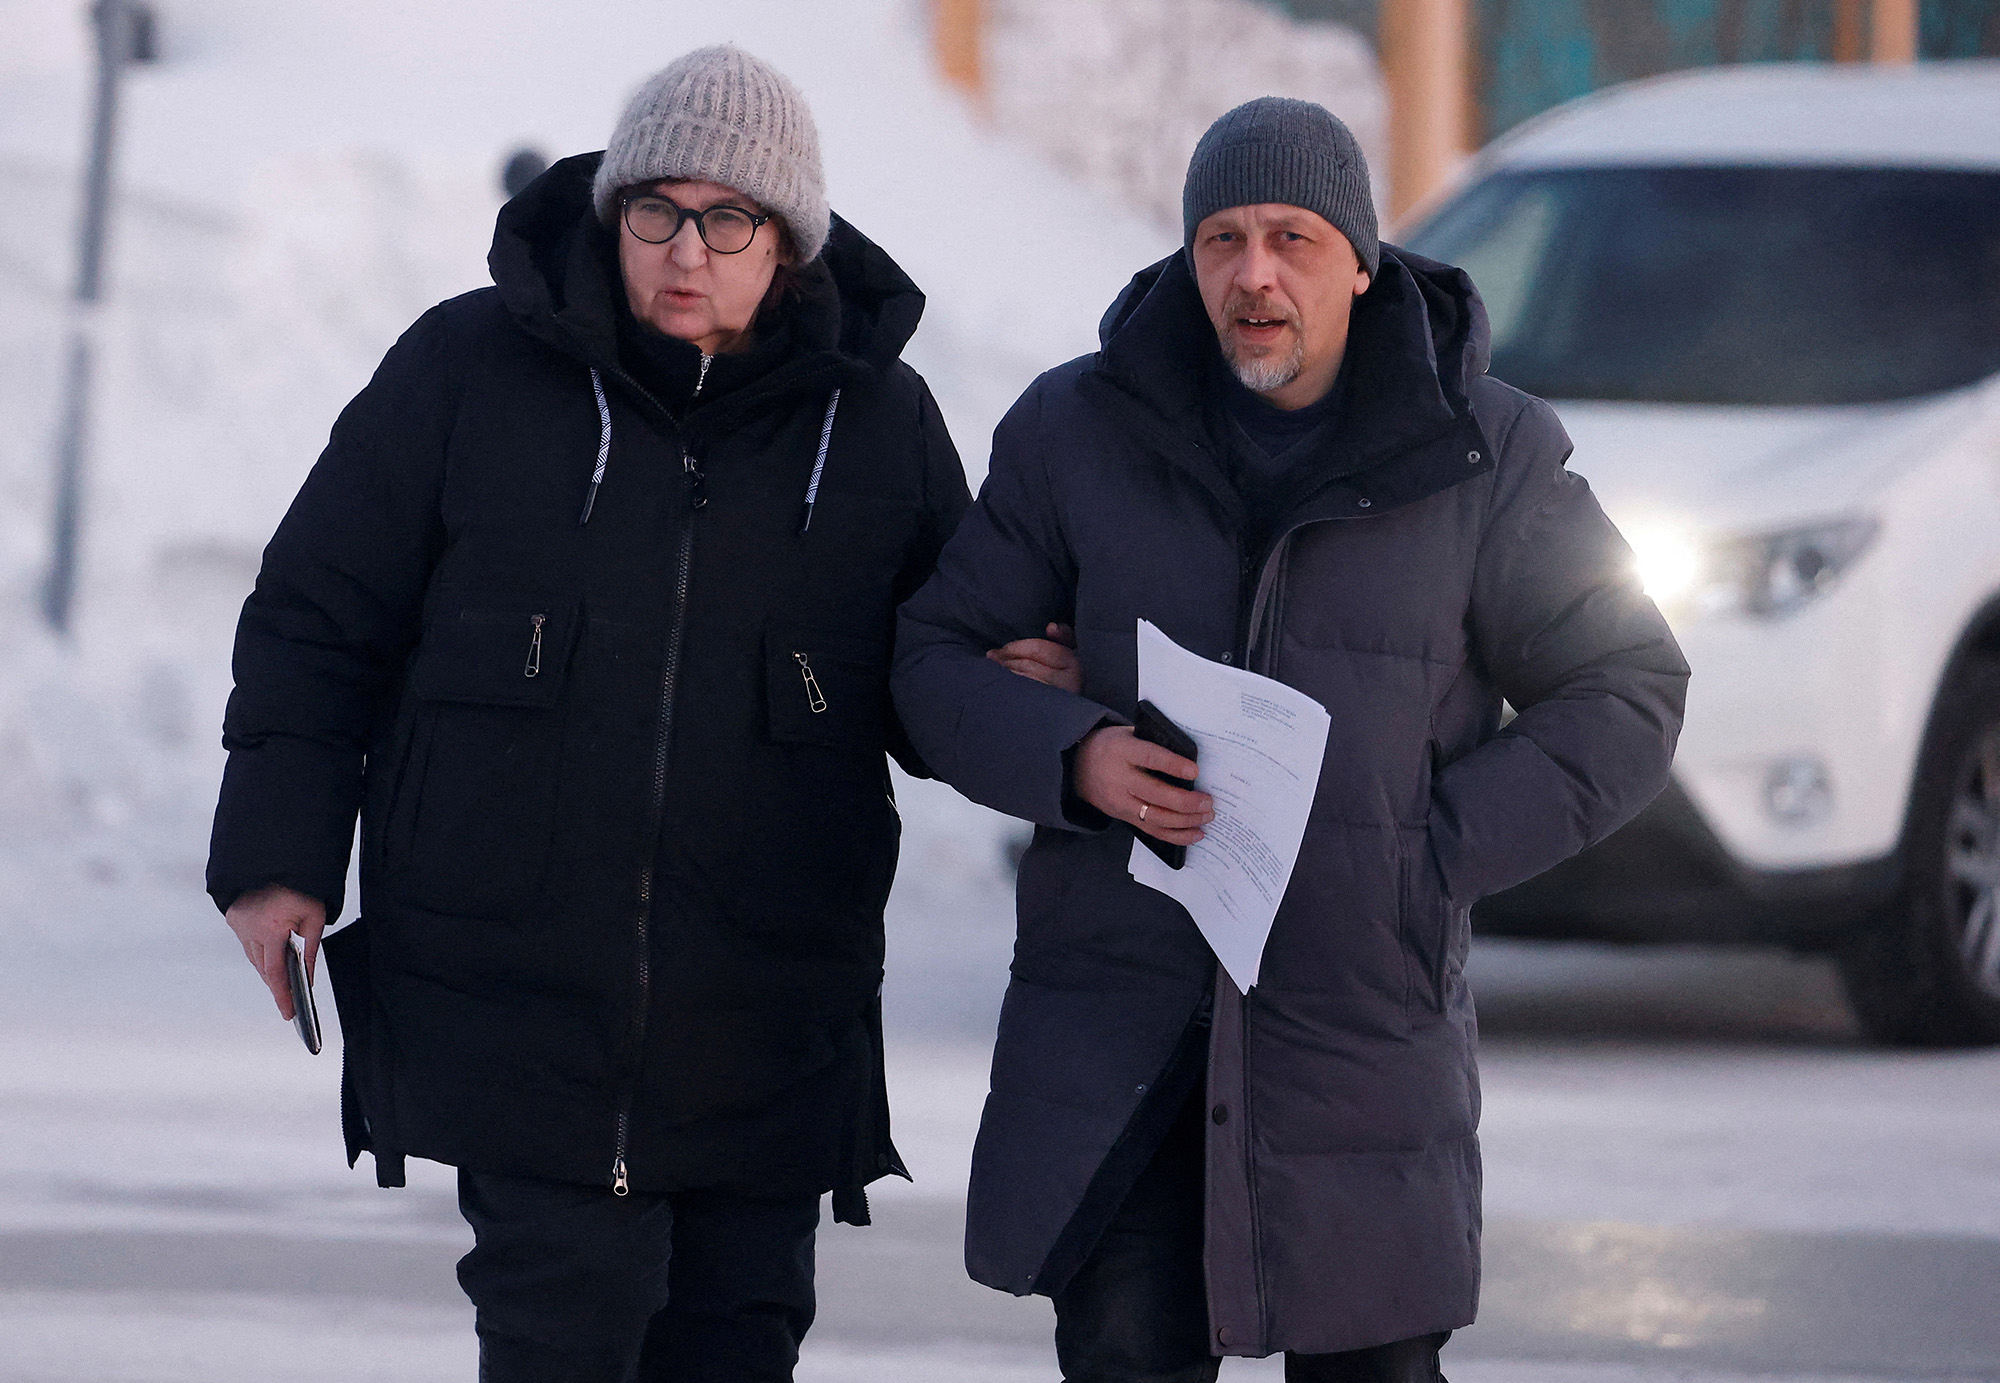 Lyudmila Navalnaya, left, the mother of late Russian opposition figure Alexey Navalny, and lawyer Vasily Dubkov arrive at the regional department of Russia's Investigative Committee in the town of Salekhard in the Yamal-Nenets Region, Russia, on February 17.